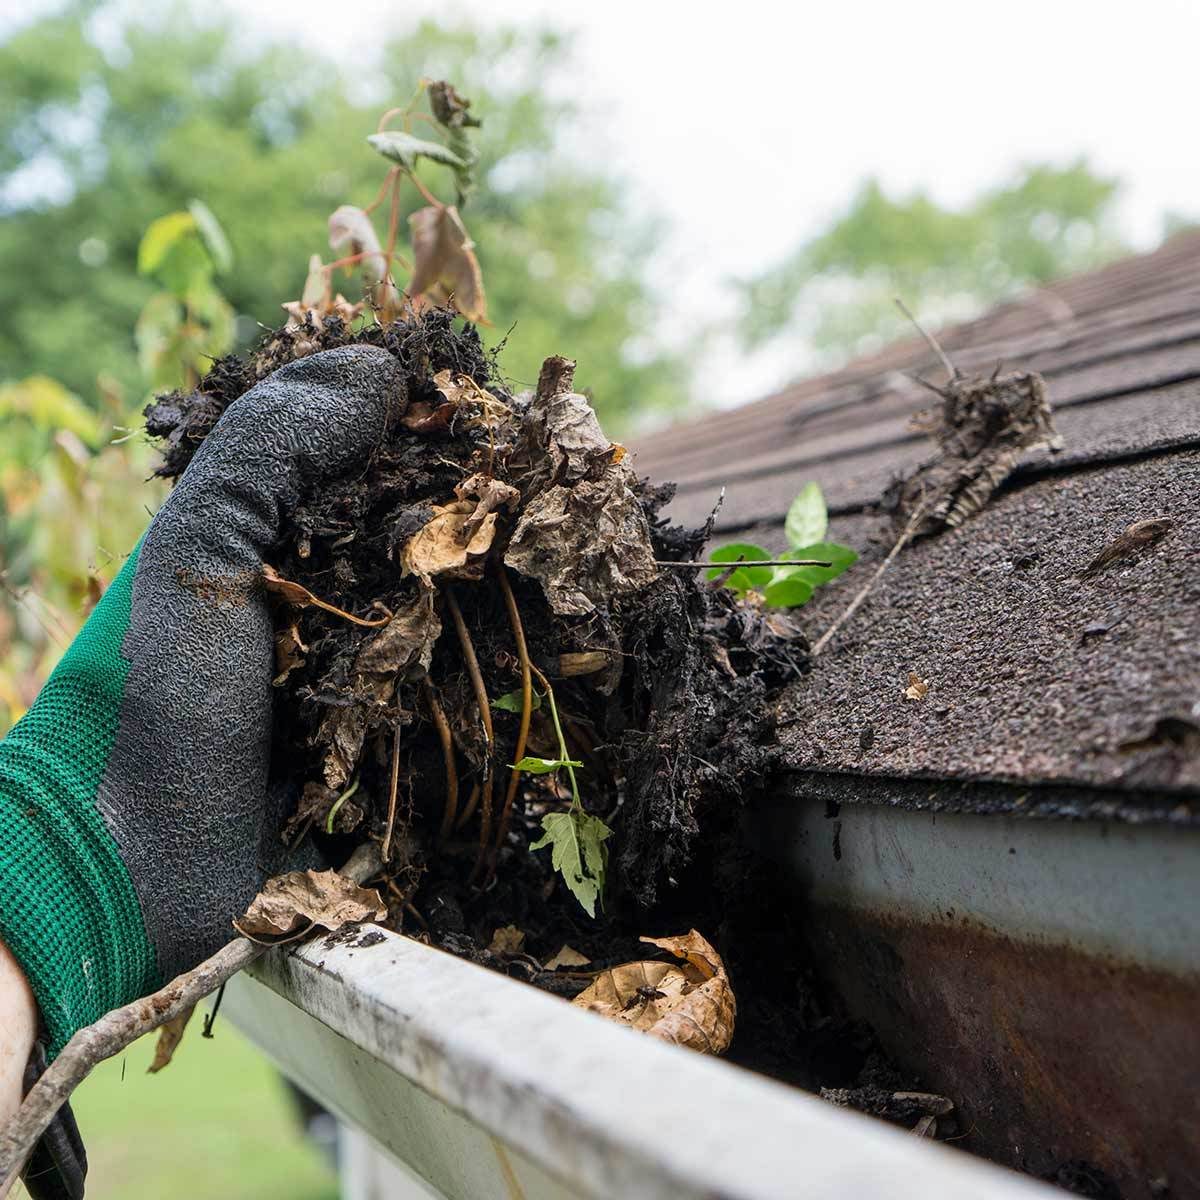 Clean Out Your Gutters